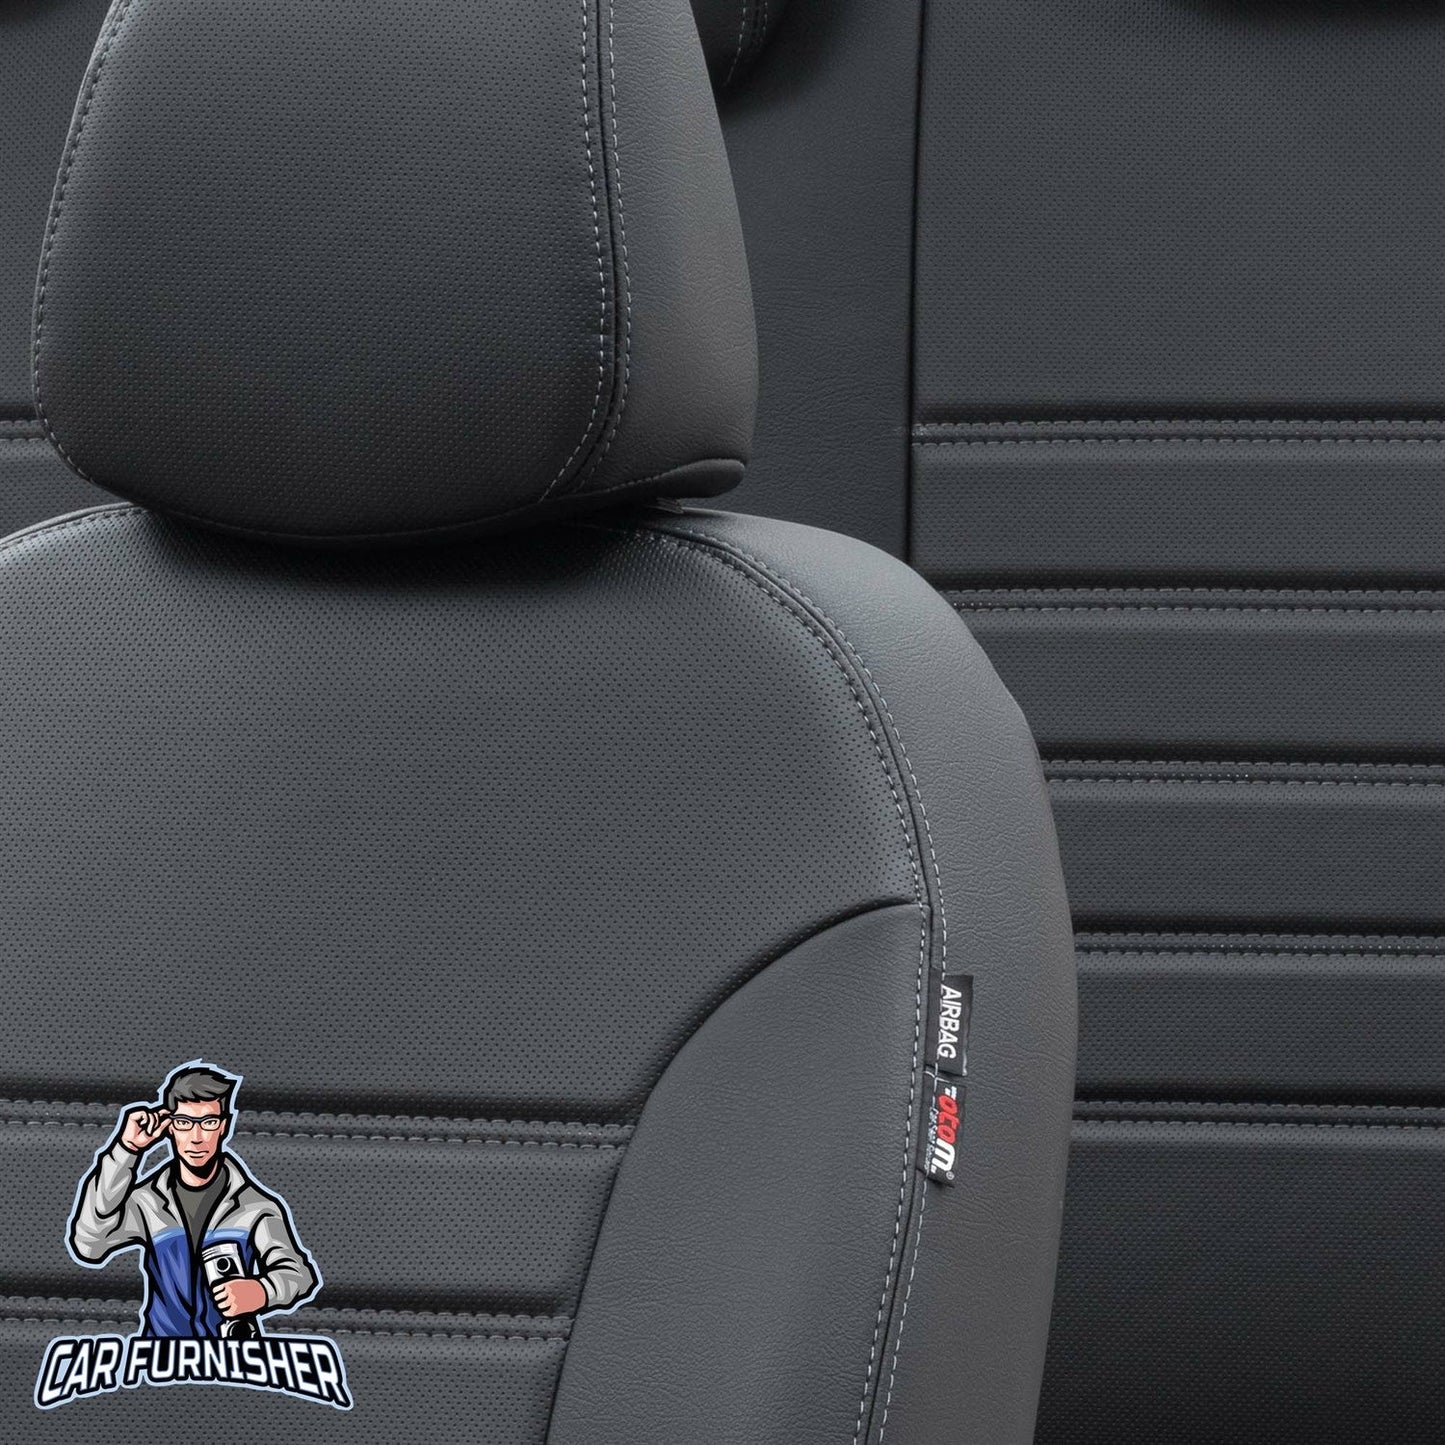 Chery Alia Seat Covers Istanbul Leather Design Black Leather